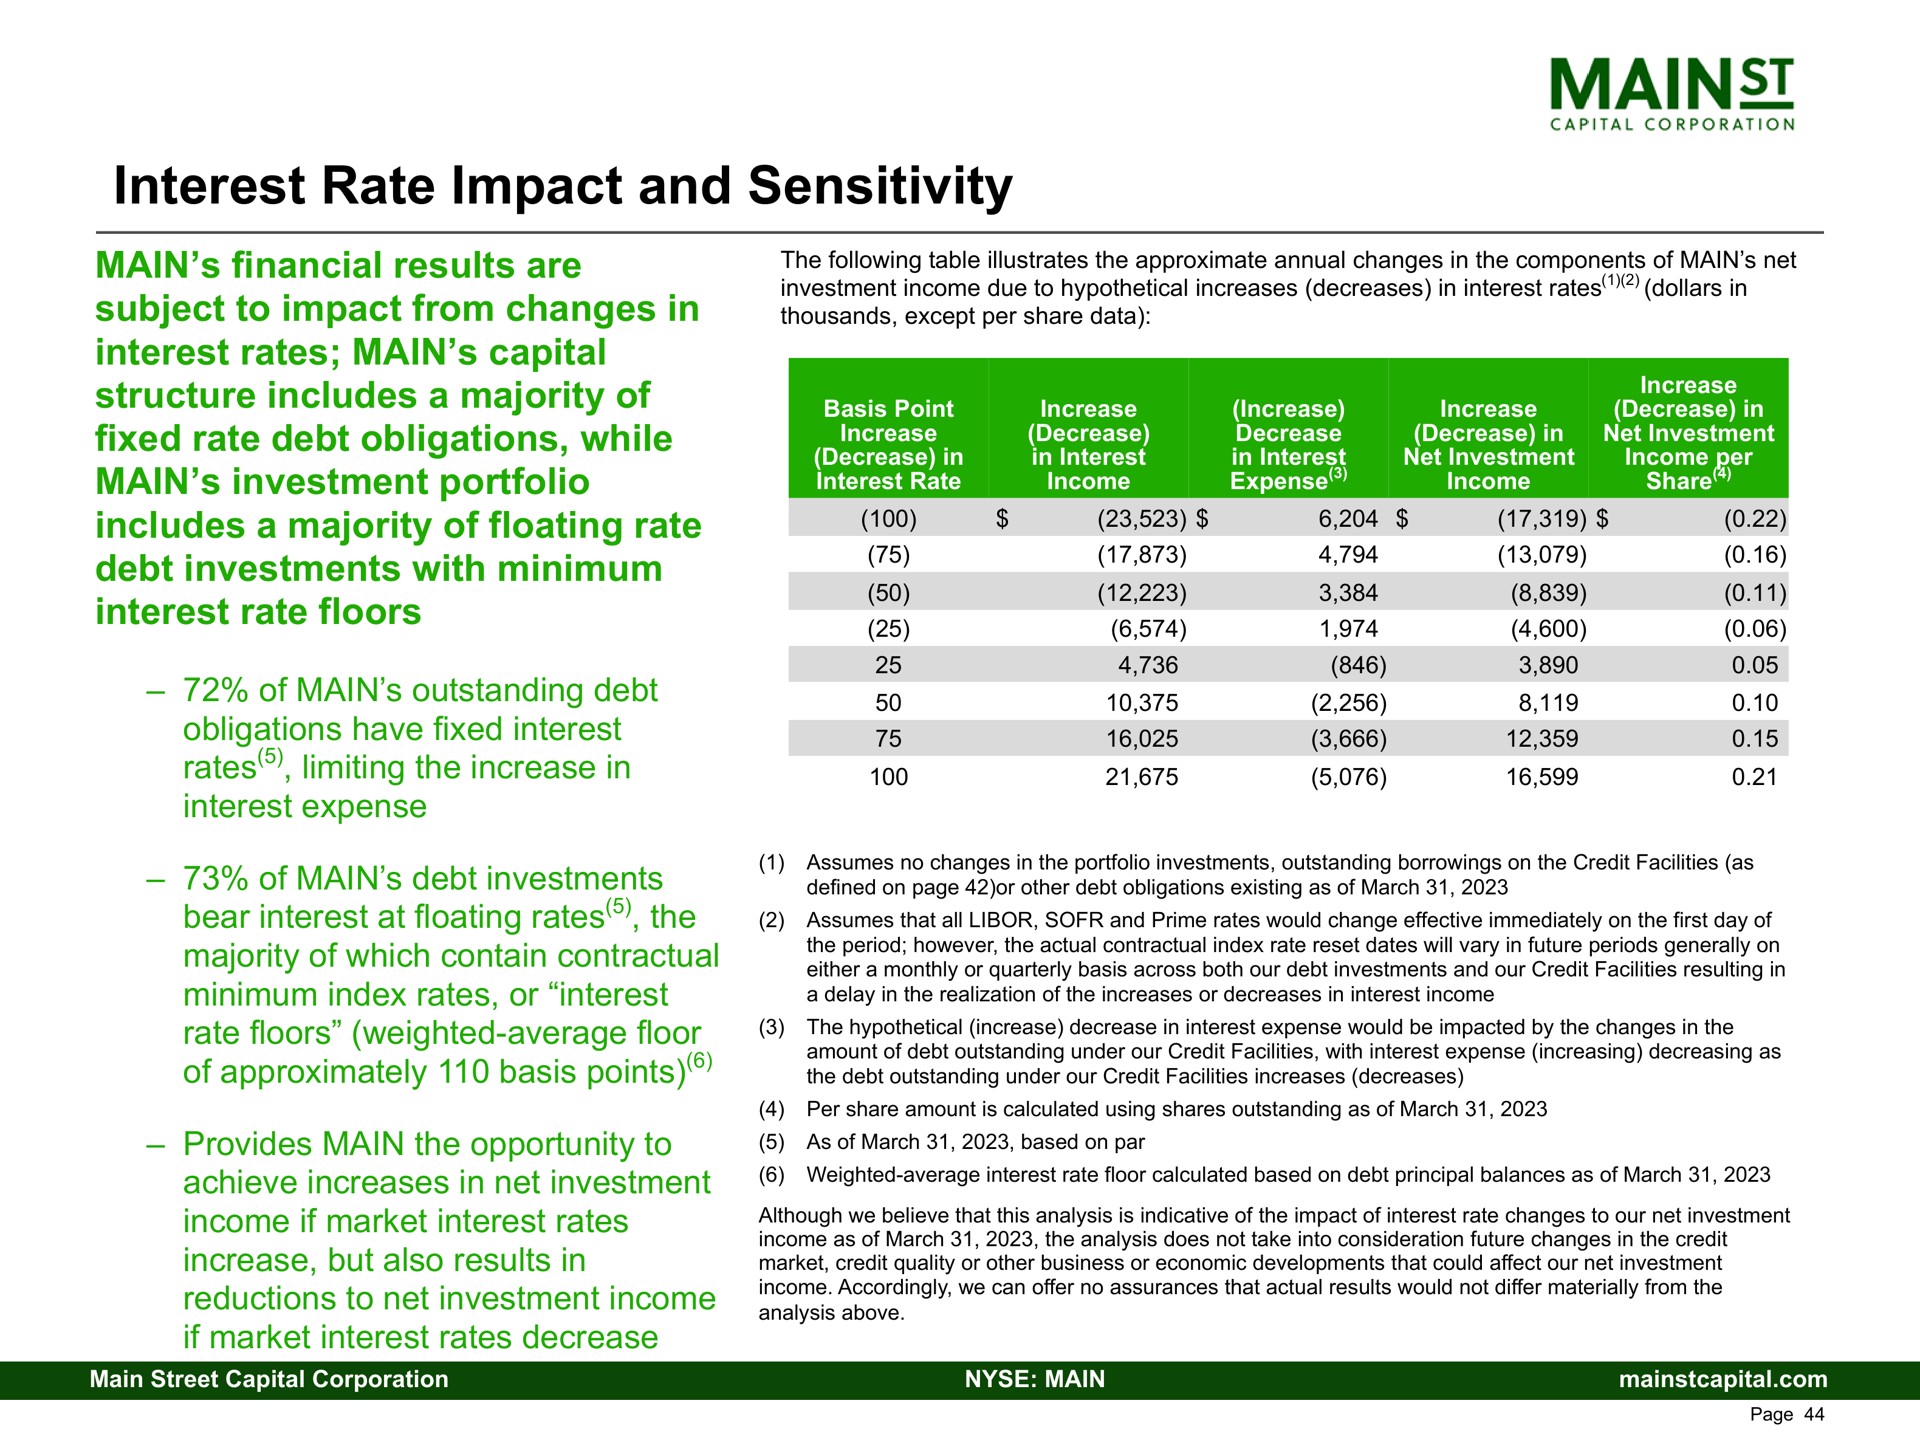 interest rate impact and sensitivity debt investments with minimum | Main Street Capital